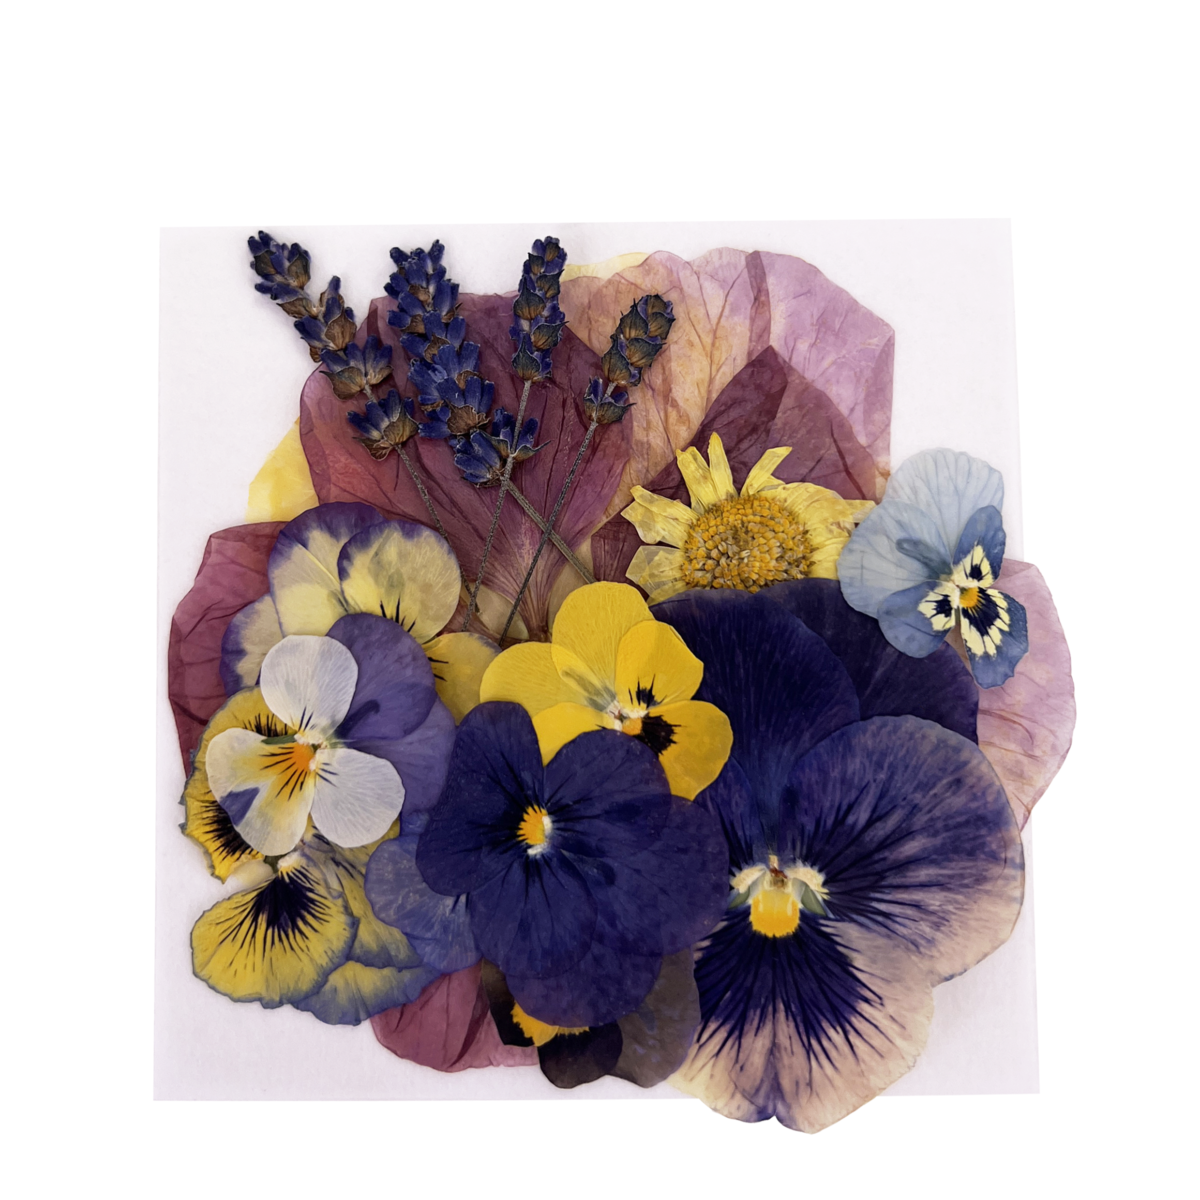 Pressed Edible Flower Selection